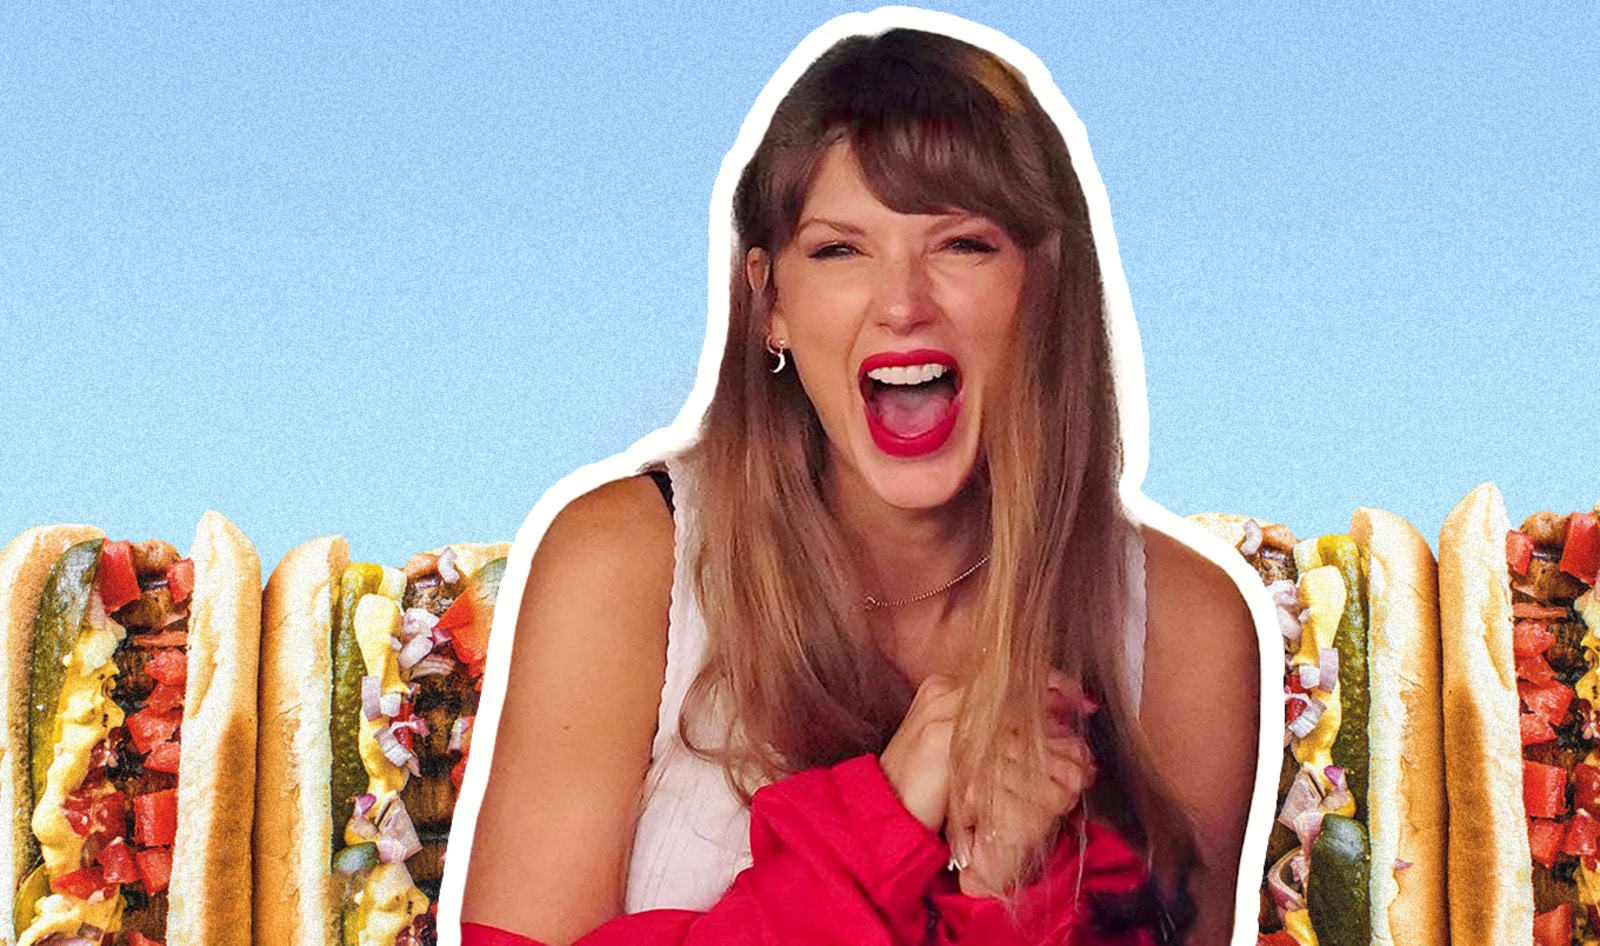 13 Dishes We'd Serve Taylor Swift at Our Super Bowl Party